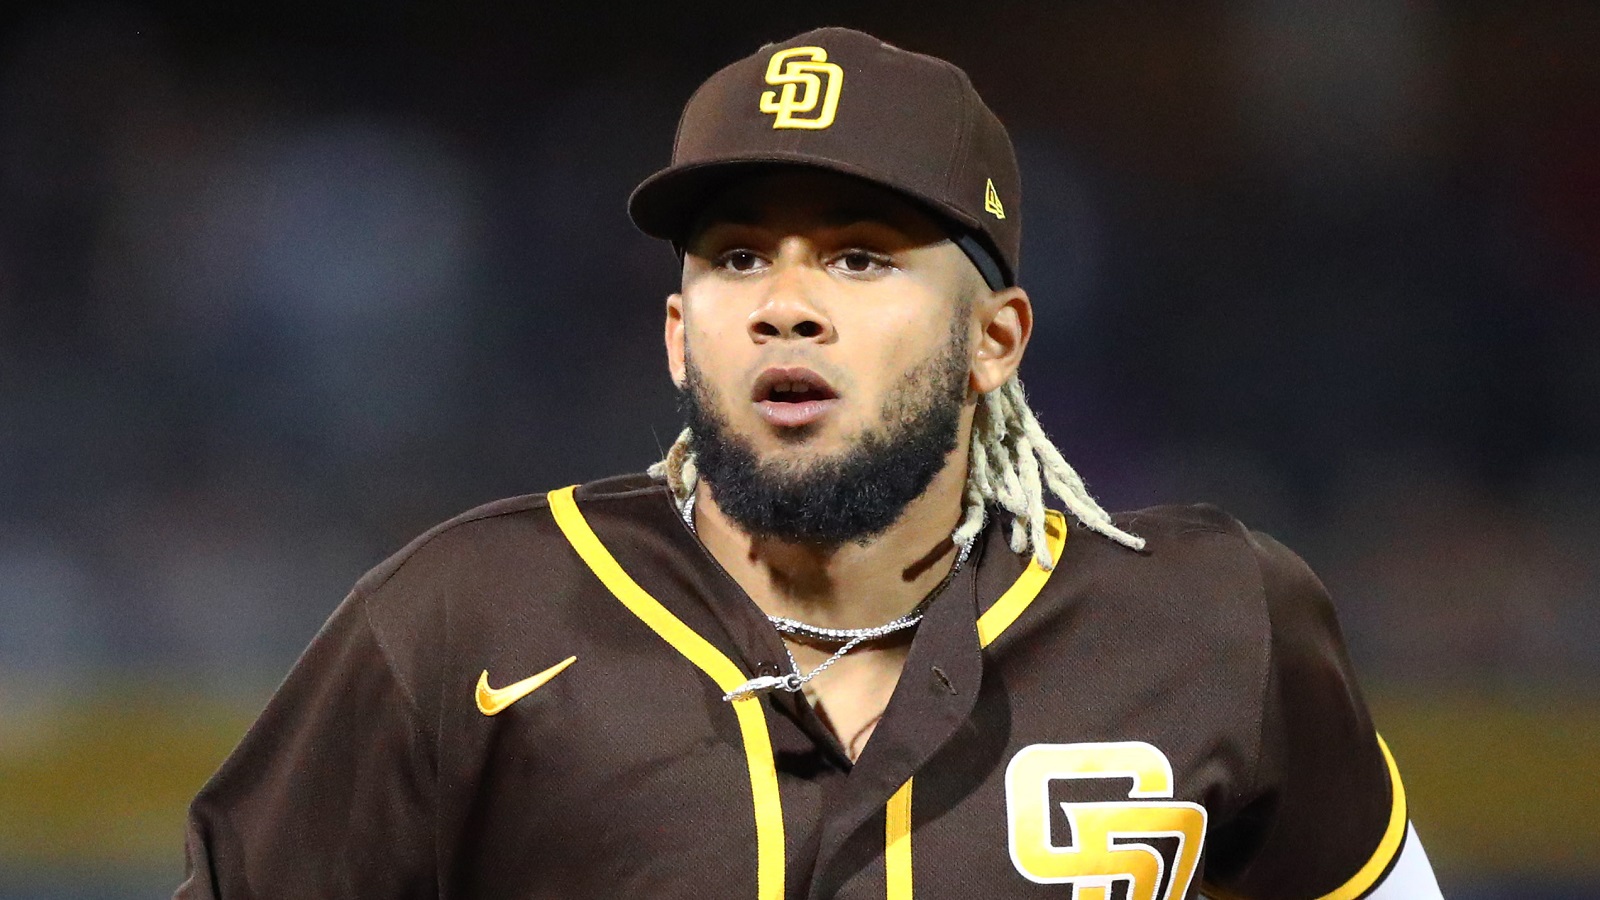 Fernando Tatis Jr. to the outfield? Here's why the Padres are getting ready  to make the move - The Athletic